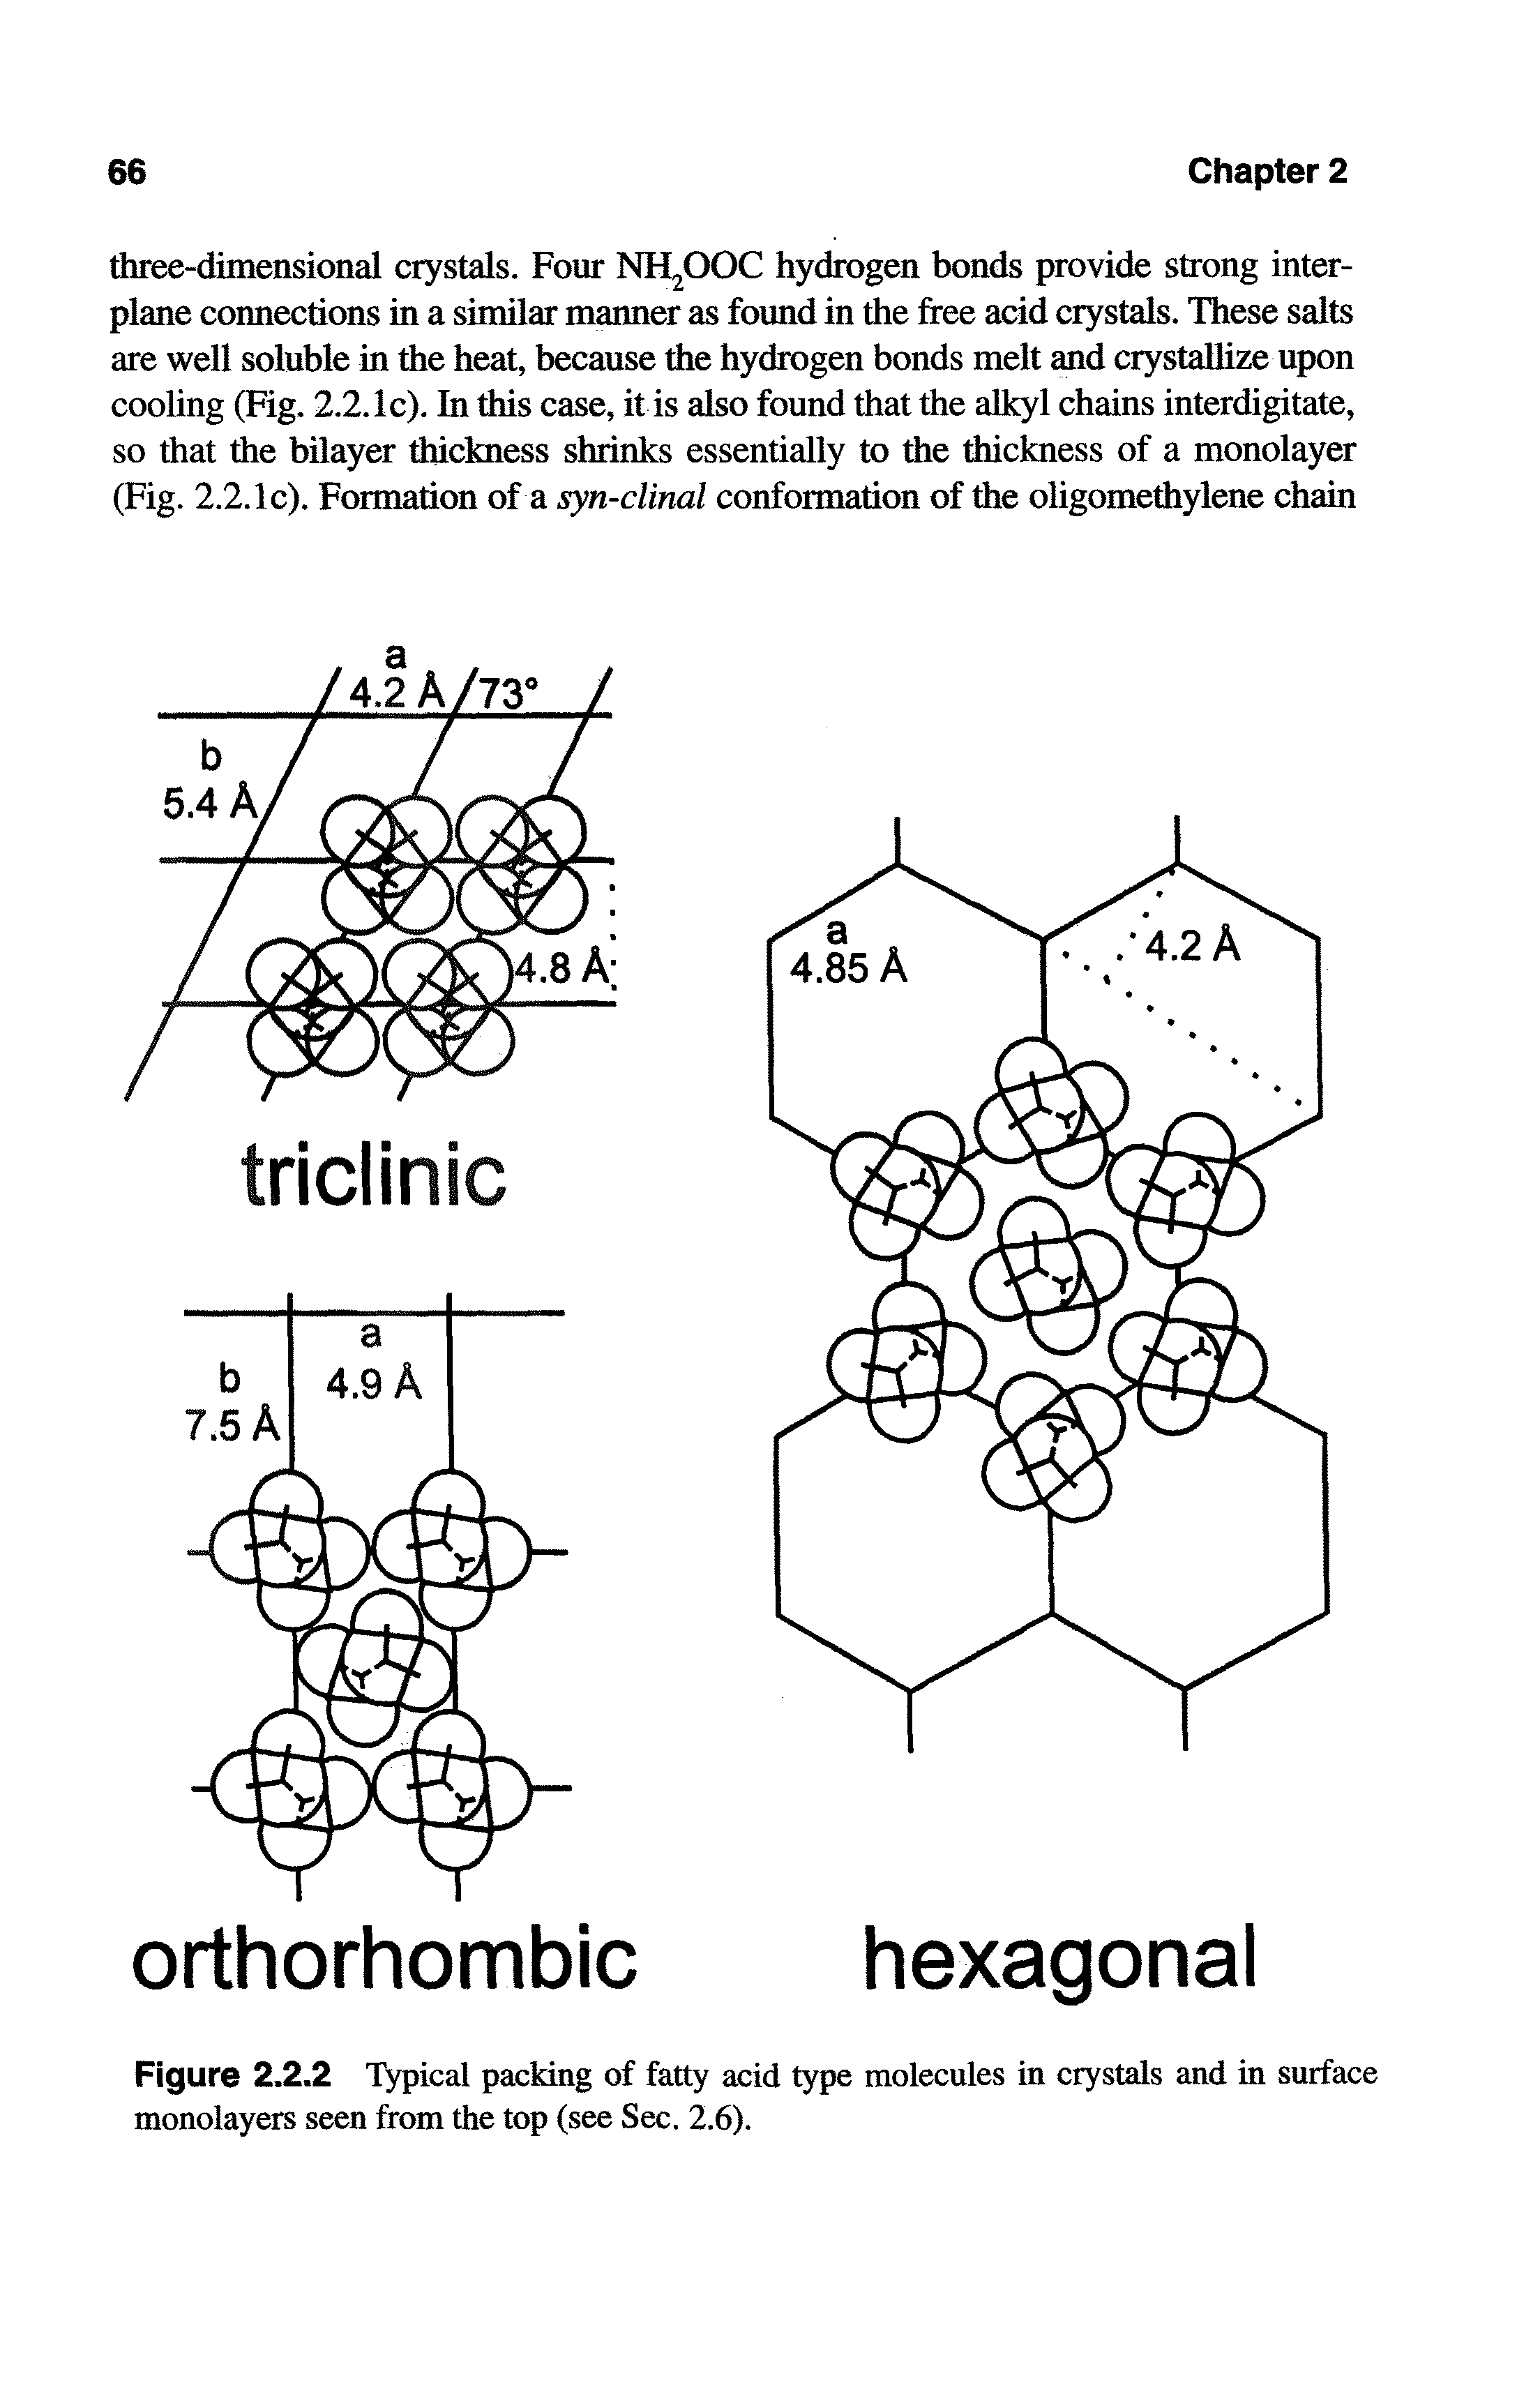 Figure 2.2.2 Typical packing of fatty acid type molecules in crystals and in surface monolayers seen from the top (see Sec. 2.6).